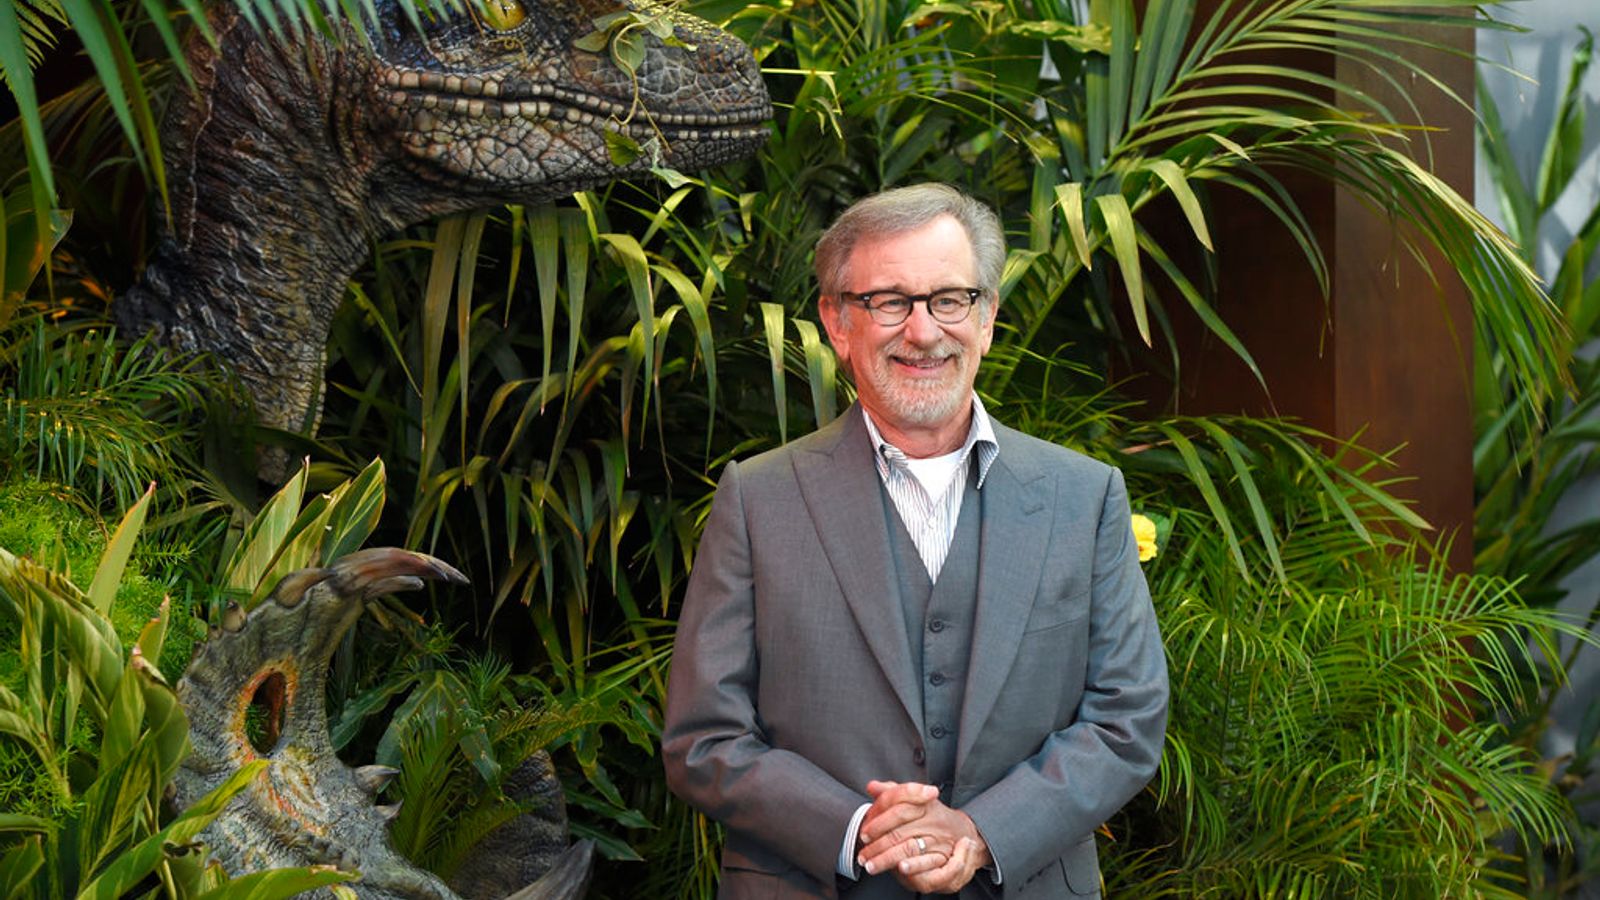 Jurassic Park revisited: How Steven Spielberg helped save Carmarthenshire cinema from closure